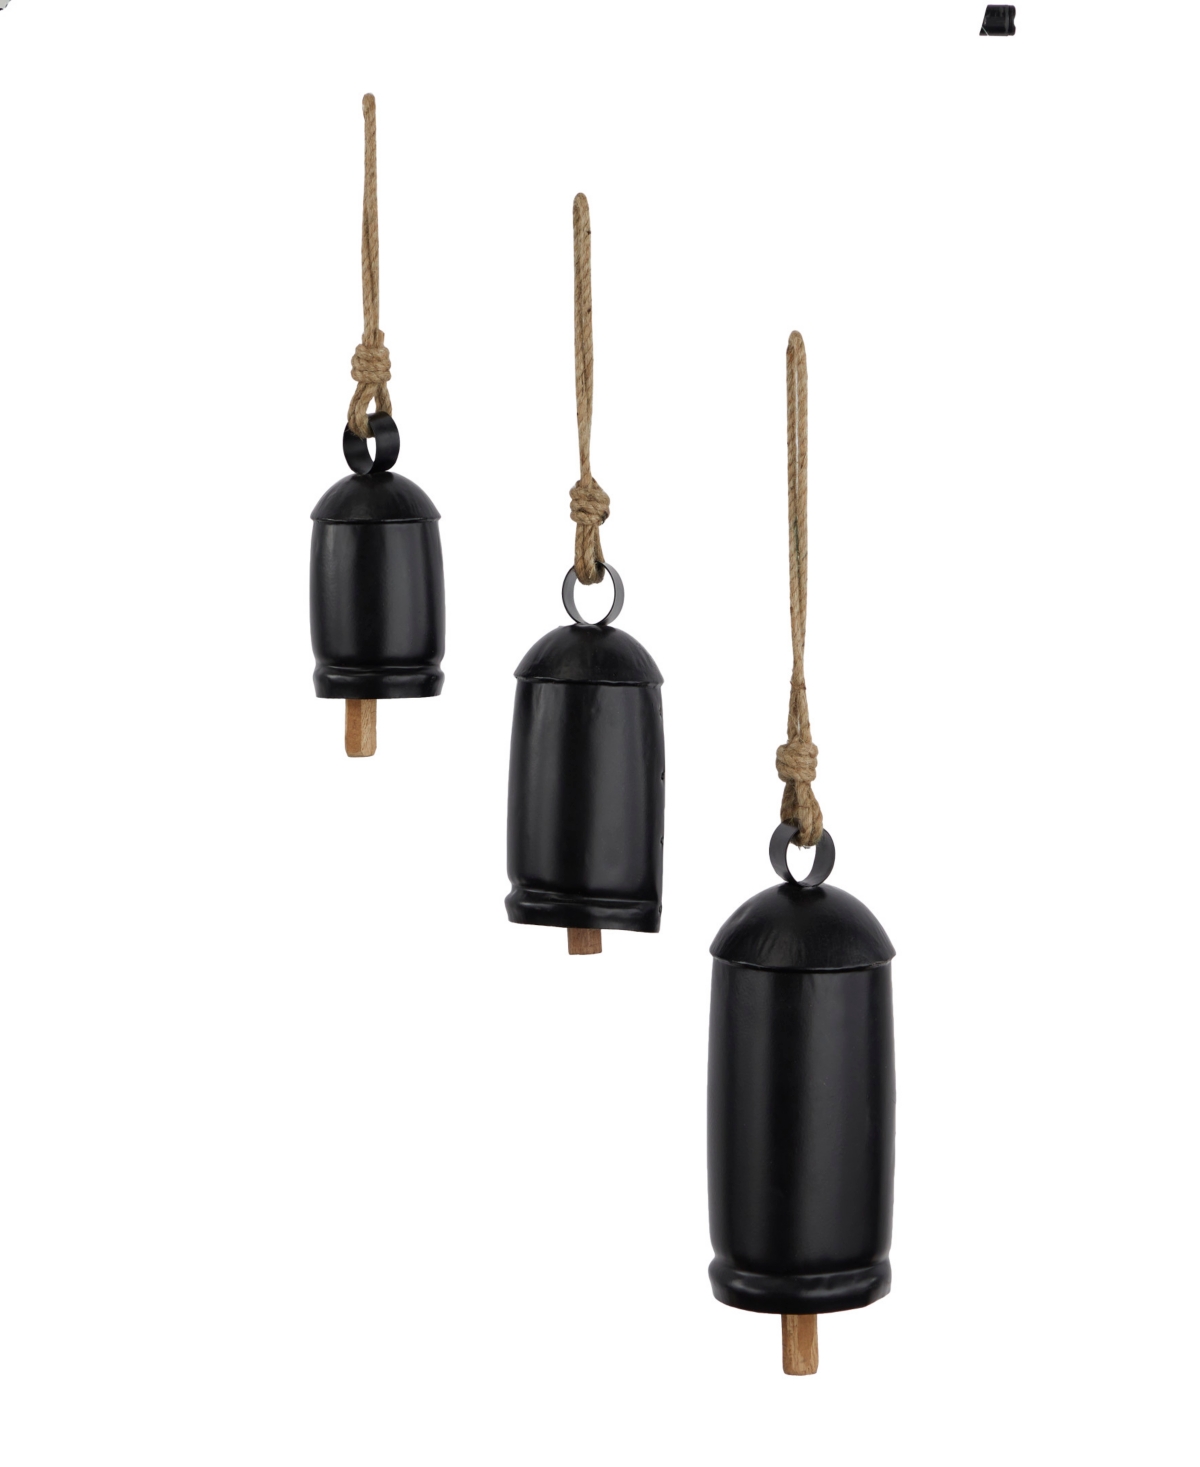 Rosemary Lane Black Metal Bohemian Decorative Cow Bell With Jute Hanging Rope Set 3 Pieces